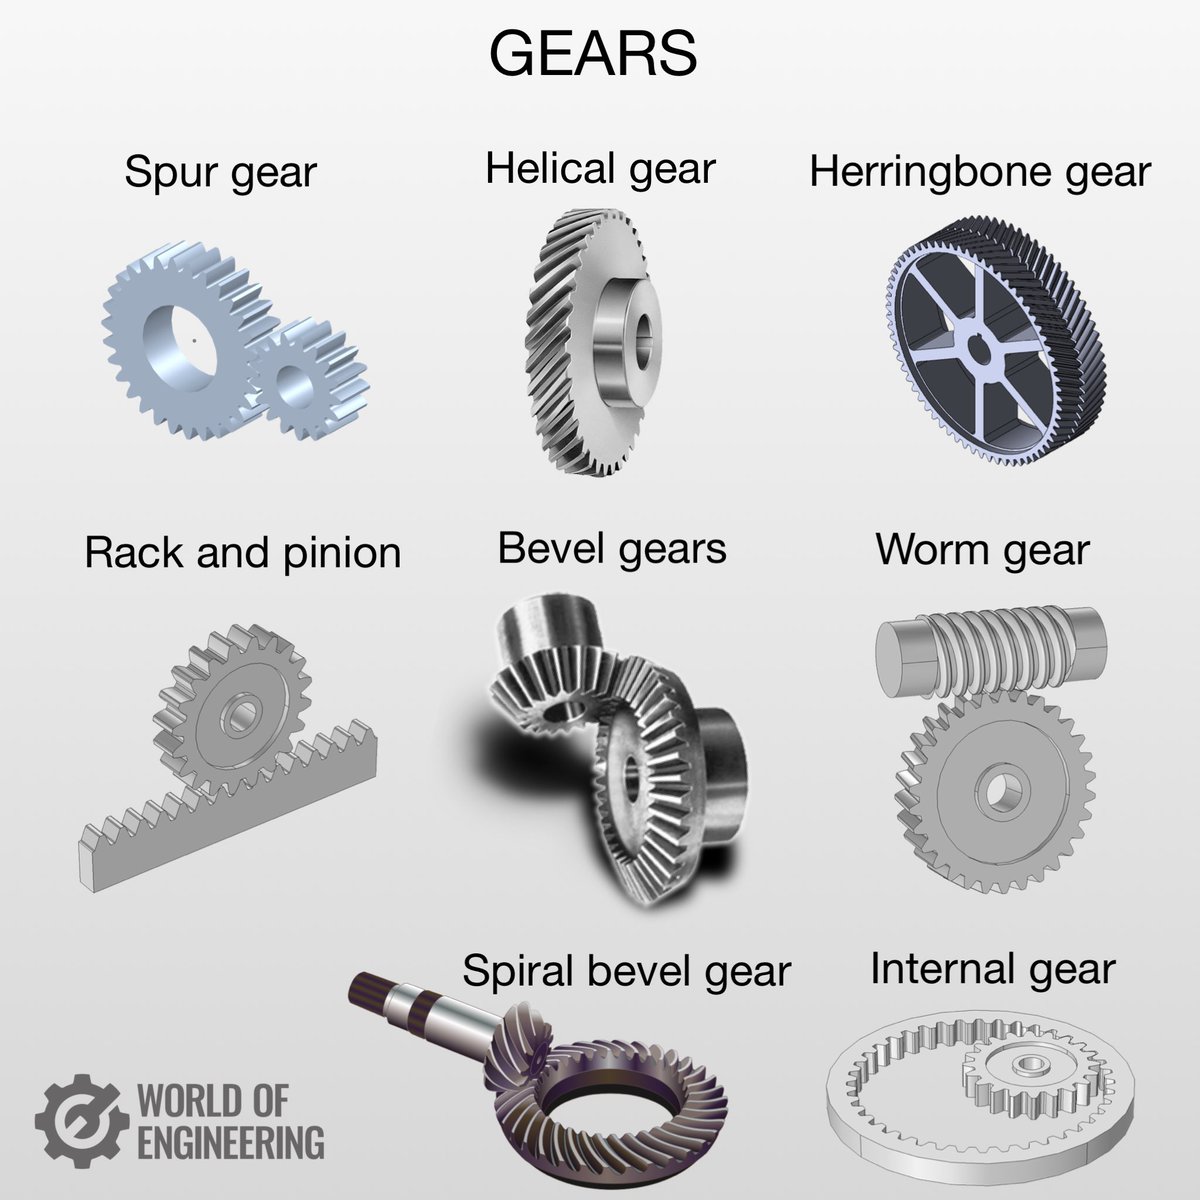 World of Engineering on X: A gear is a rotating circular machine part  having cut teeth or, in the case of a cogwheel or gearwheel, inserted teeth  (called cogs), which mesh with